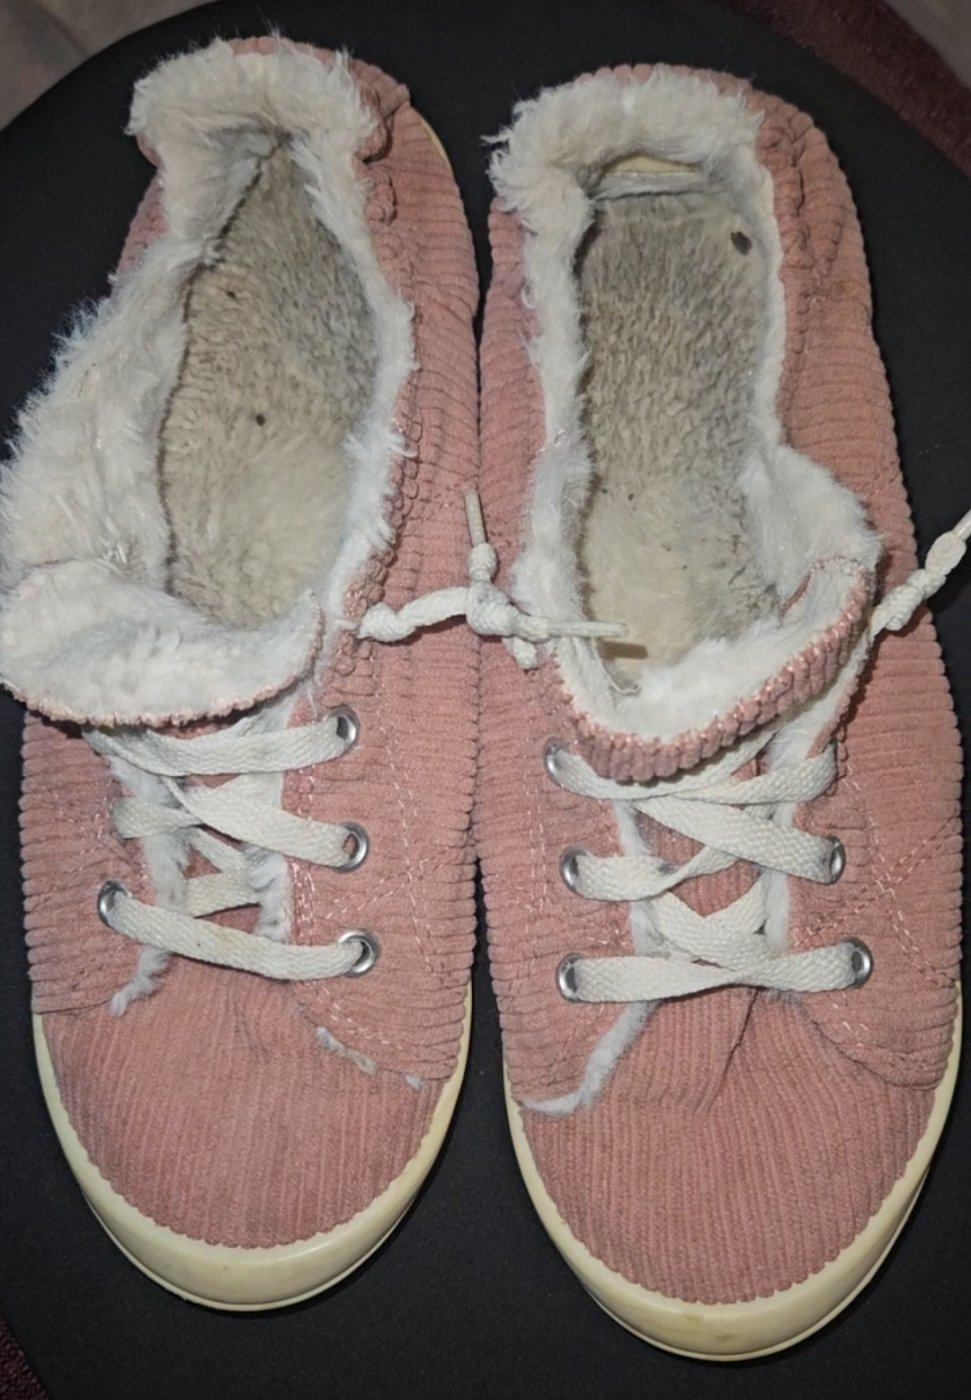 Smelly, pink cloth tennis shoes